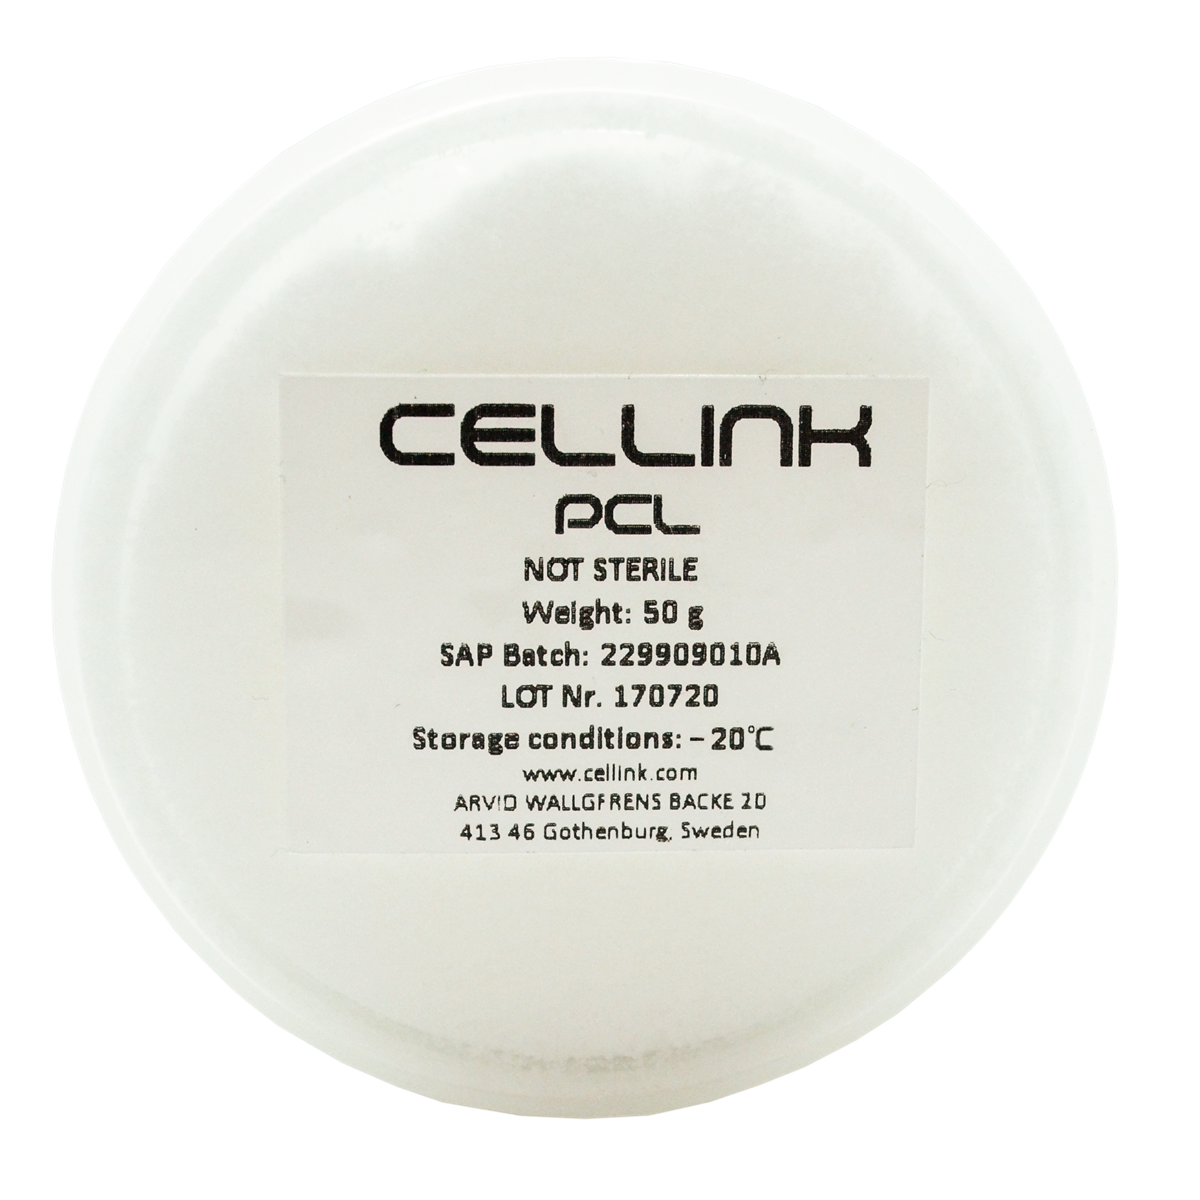 CELLINK PCL 100g